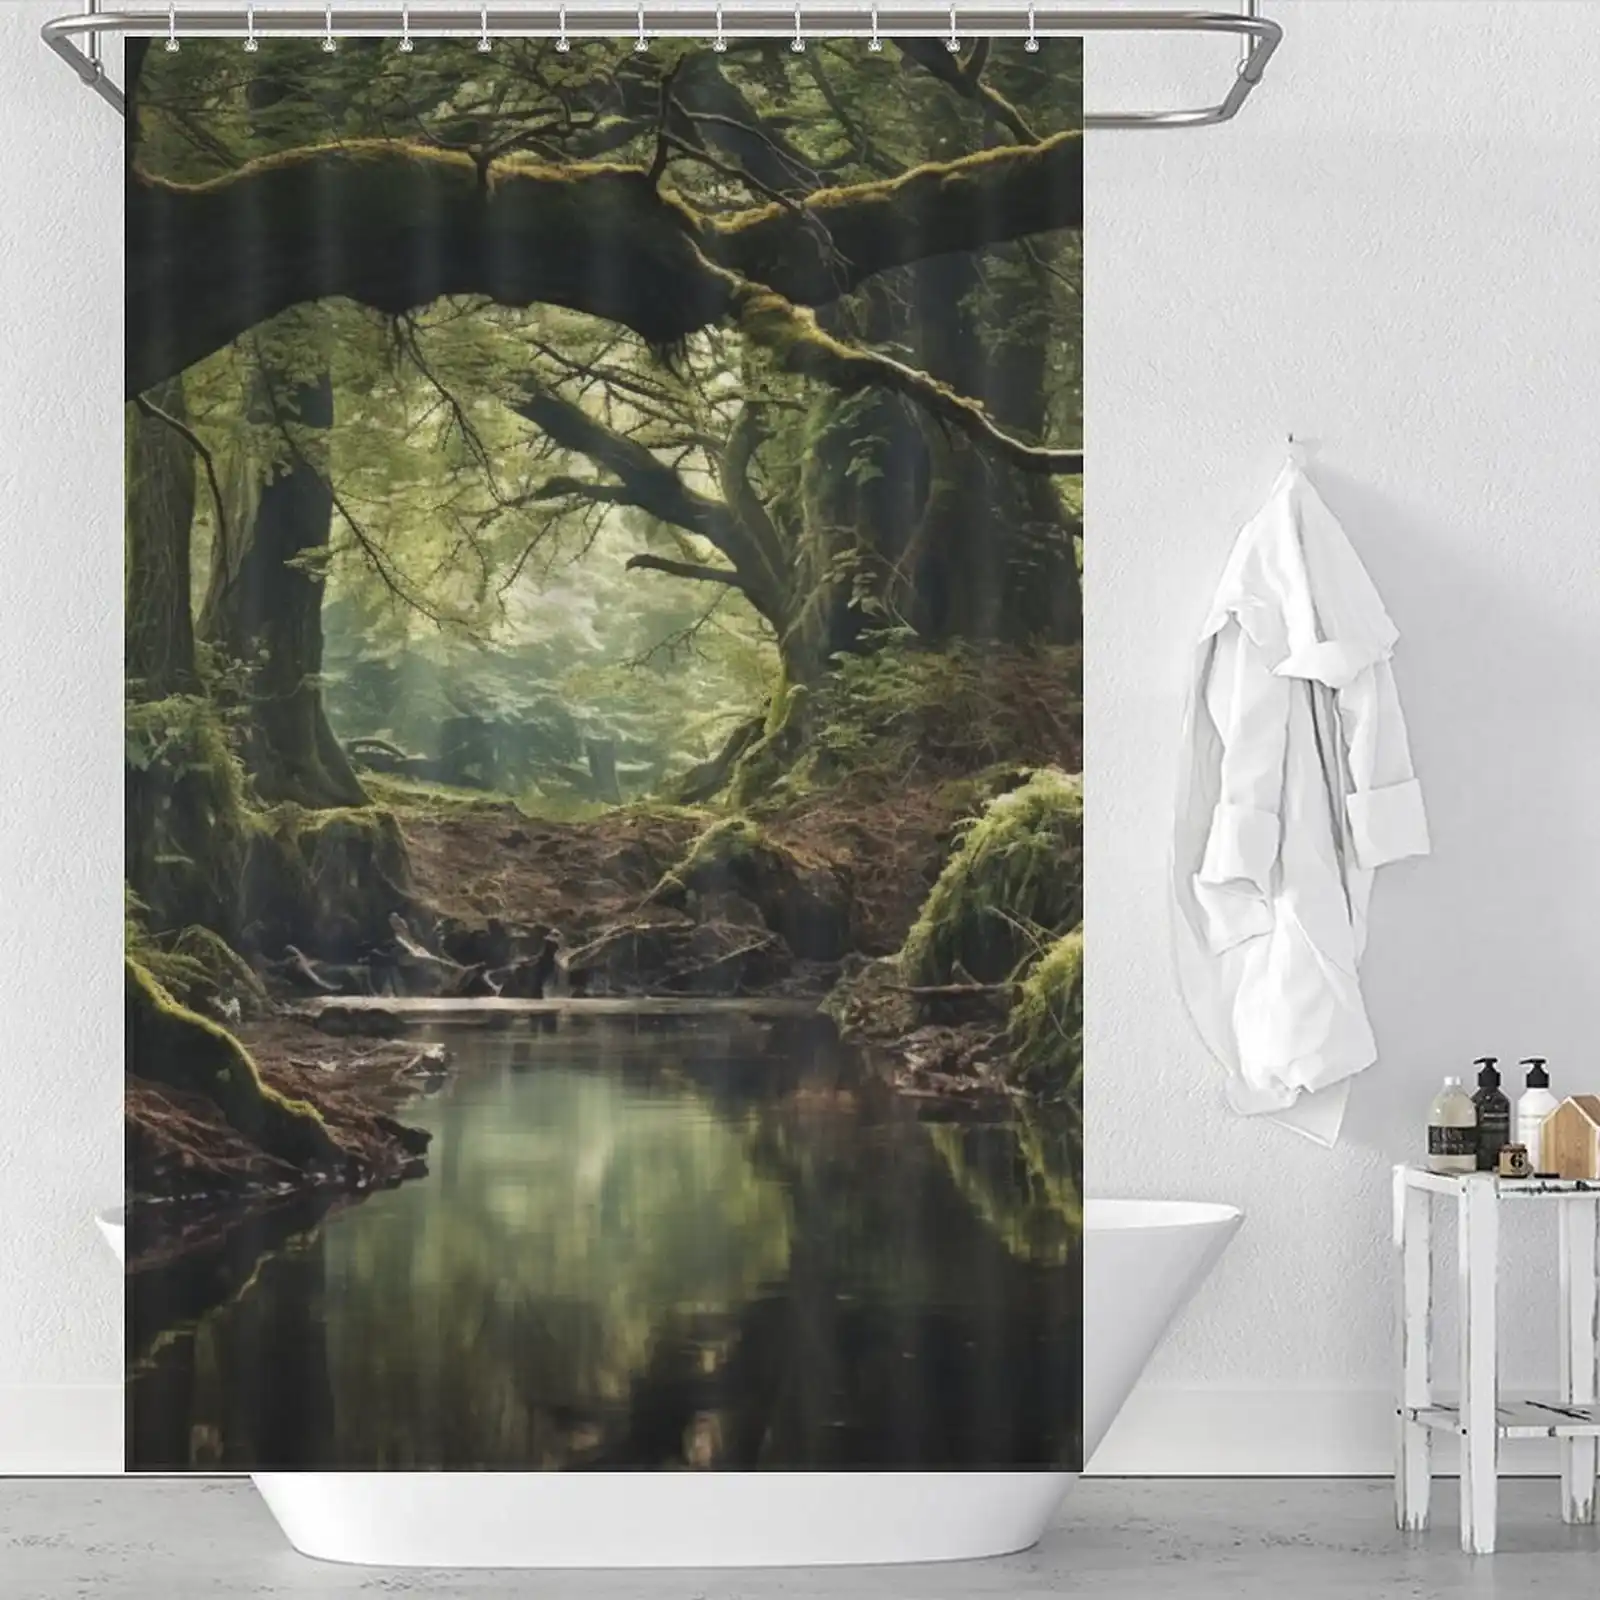 Unique Shower Curtains for Small Bathrooms: A forest shower curtain with moss and trees.